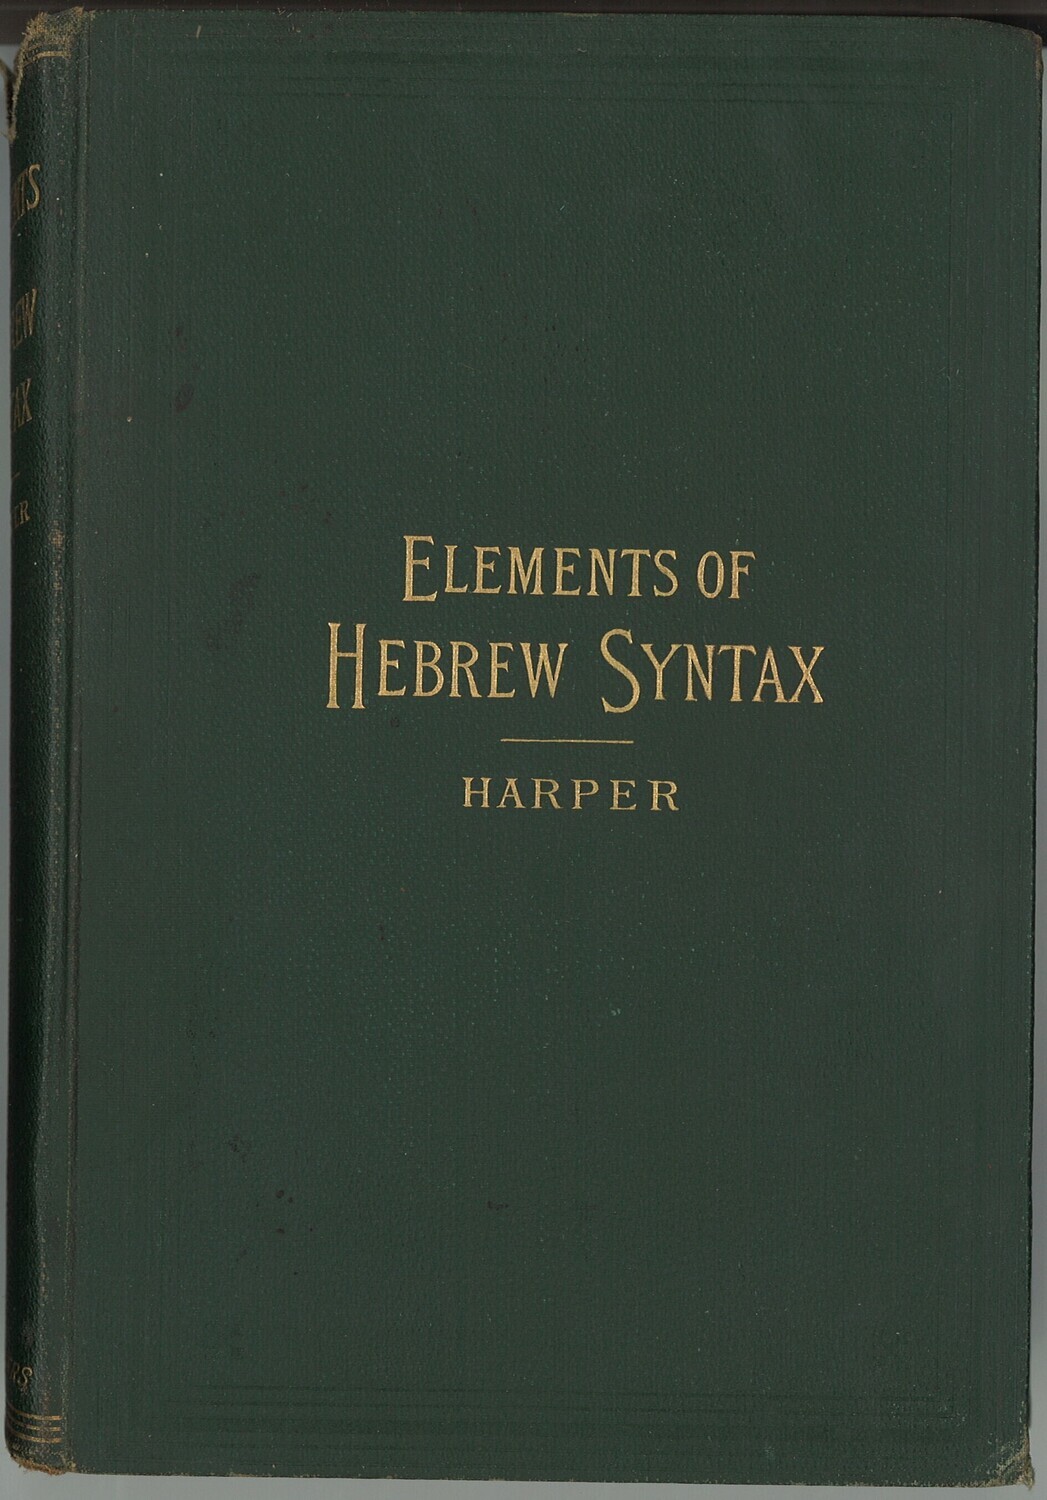 Elements of Hebrew Syntax by An Inductive Method